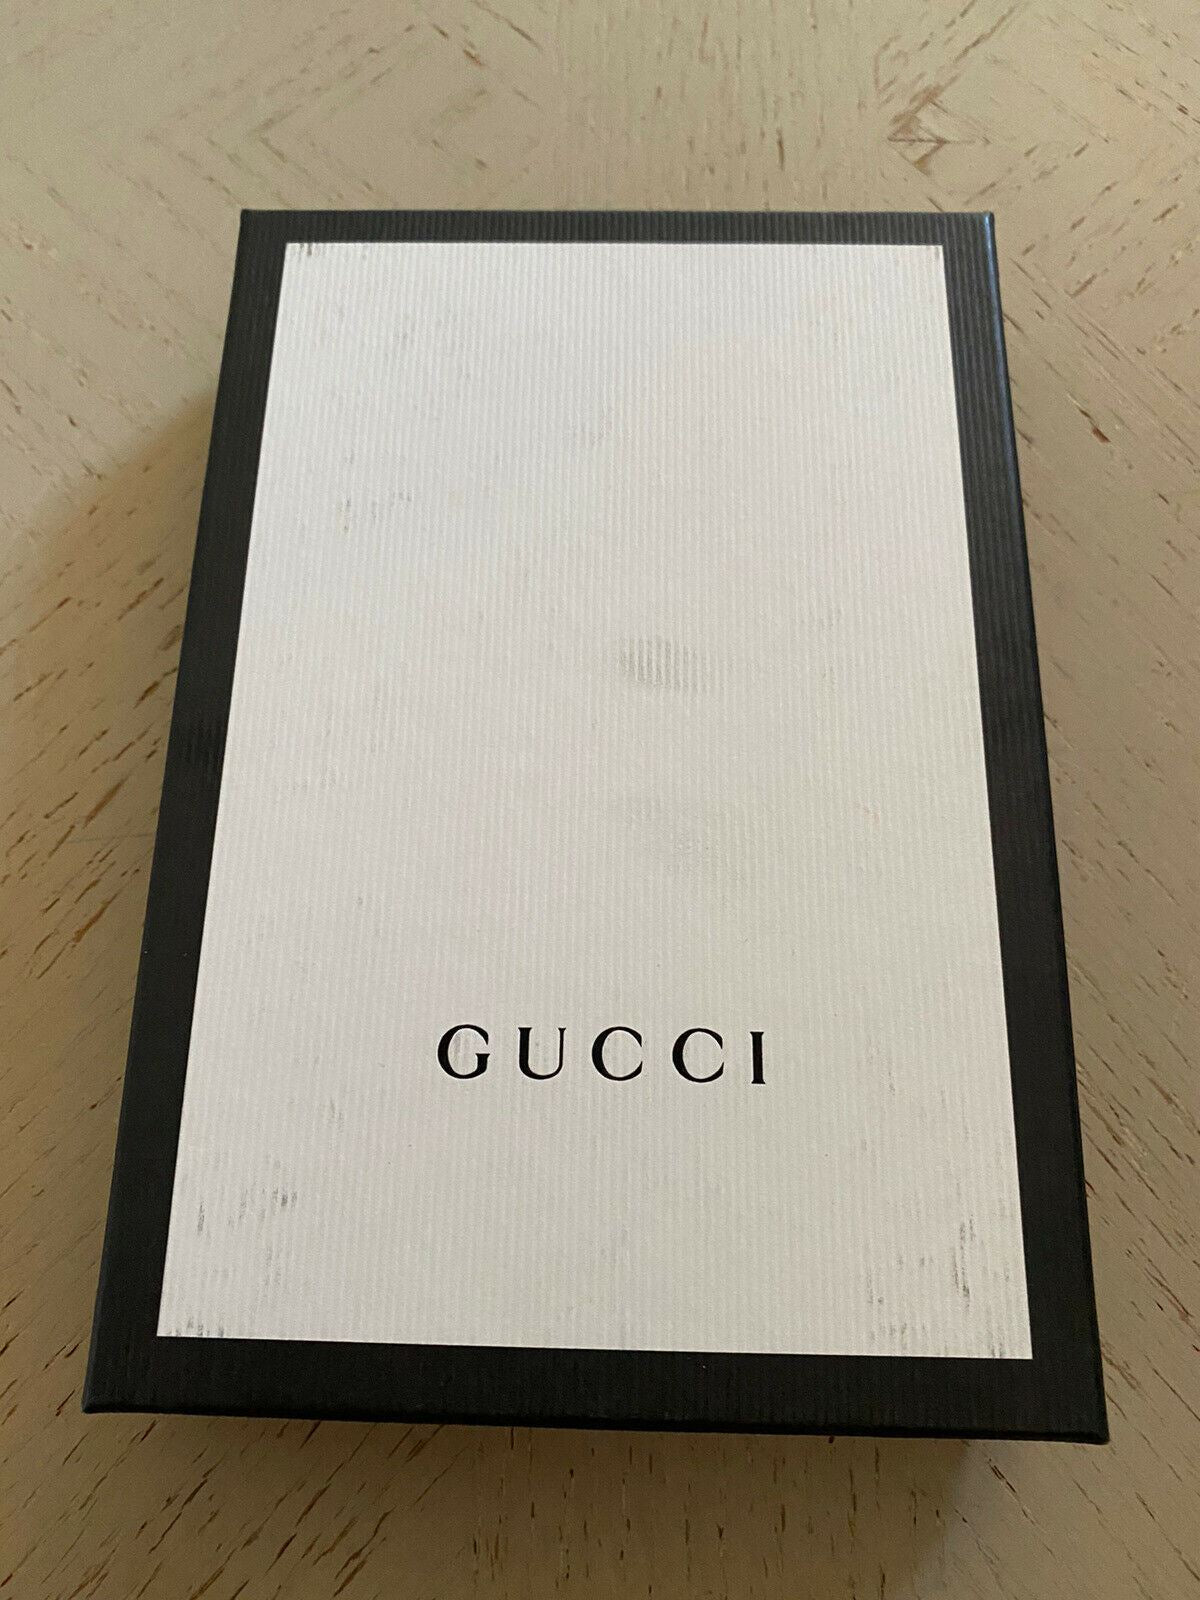 New $640 Gucci iPhone 7/8 Case GG Monogram Beige Italy